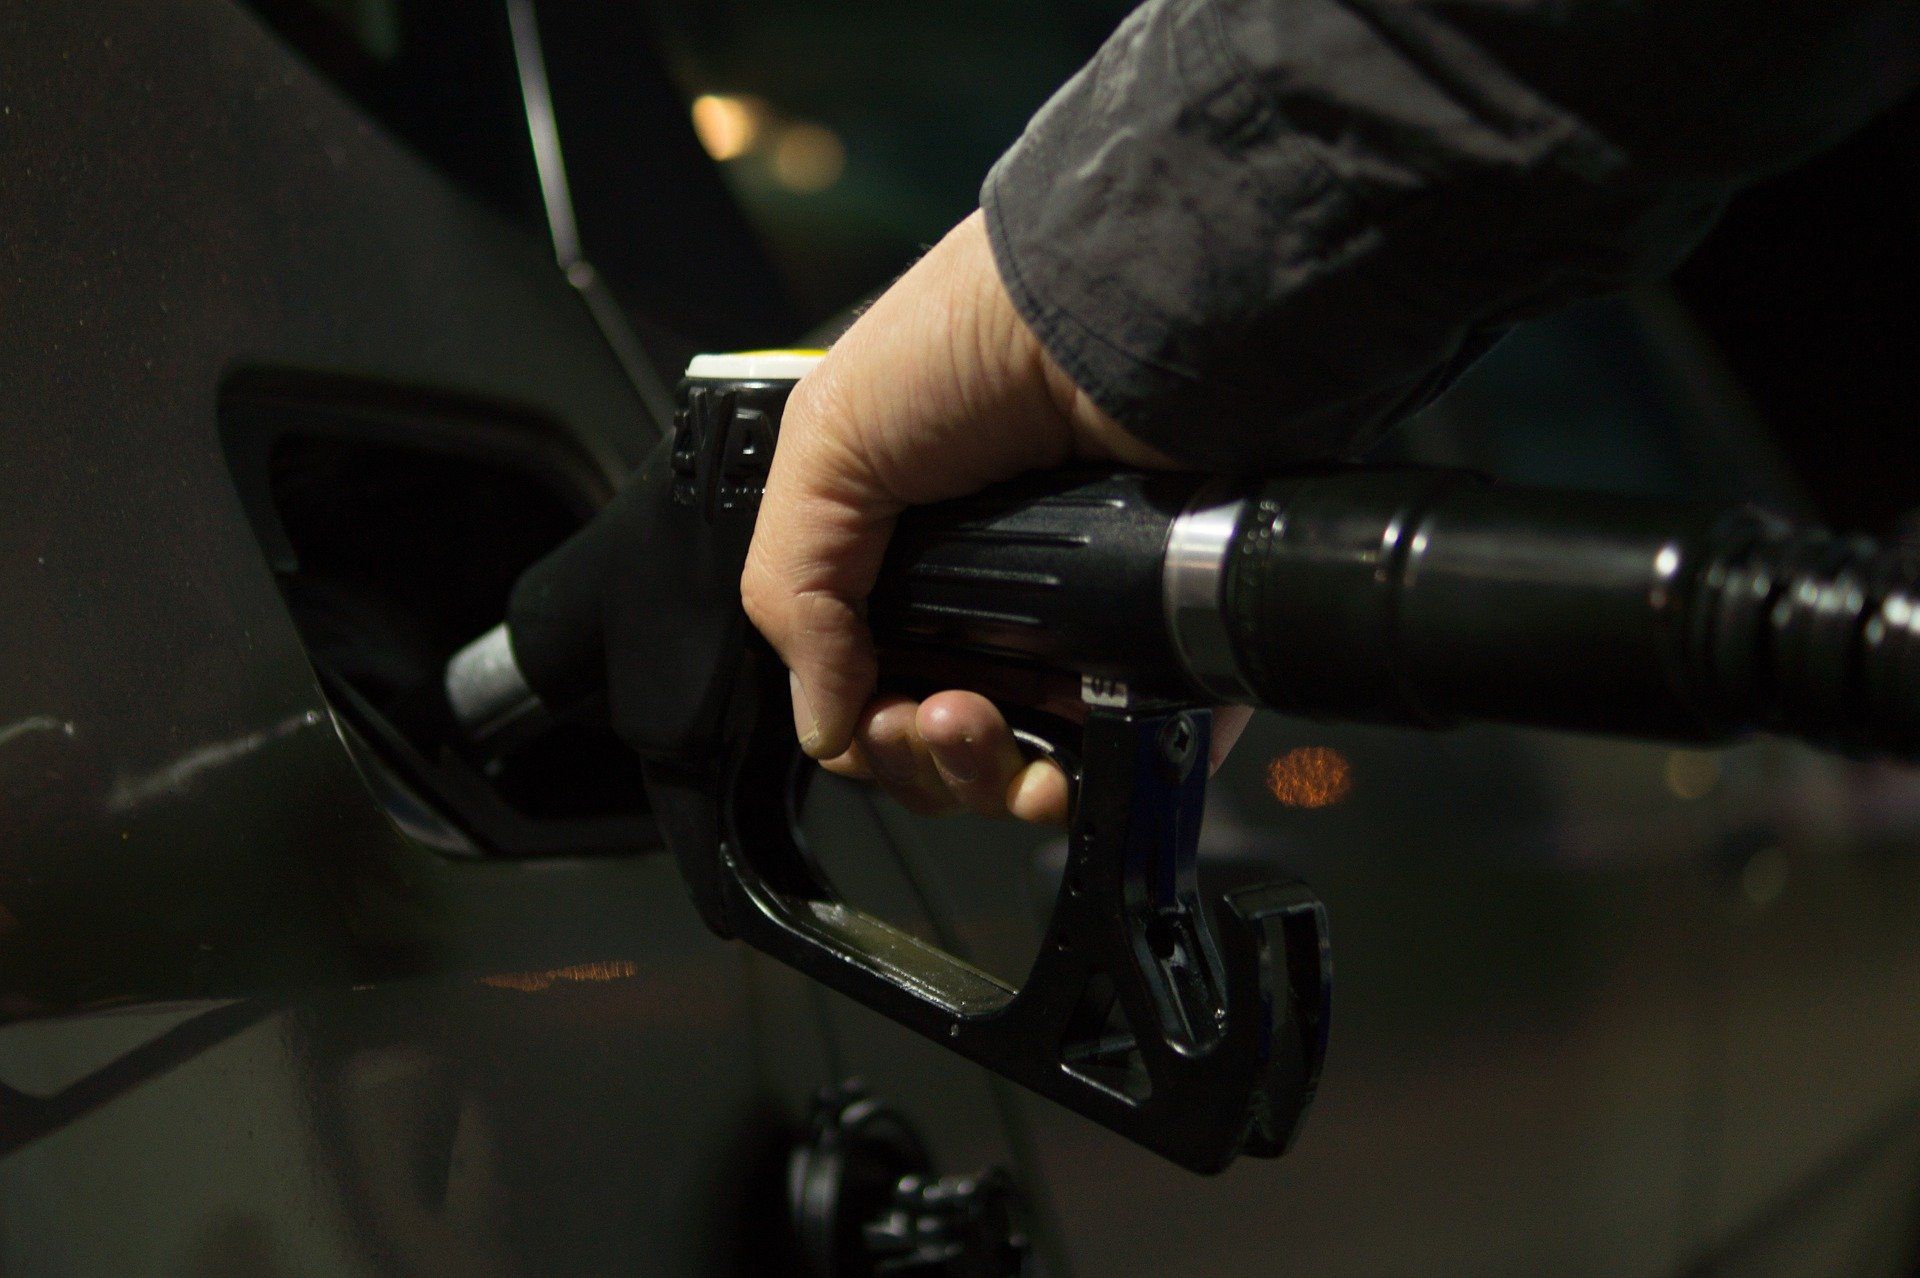 Fuel Price today: Petrol priced at Rs 95.41, diesel Rs 86.67 in Delhi on December 13